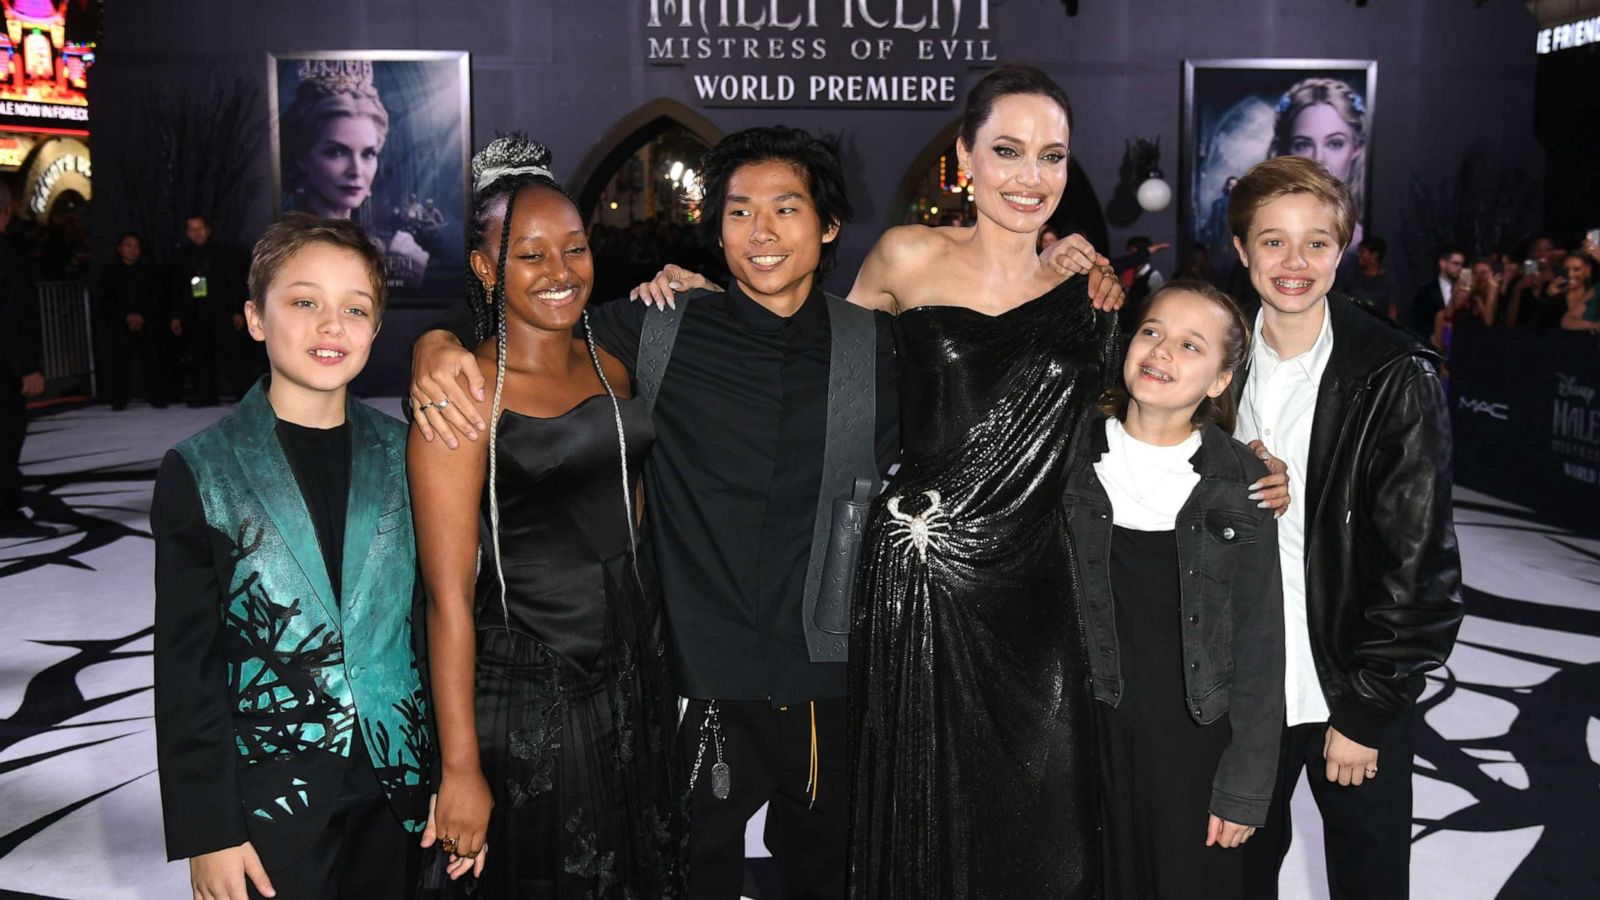 Angelina Jolie's Sons Maddox & Pax Join Her for Another Day of